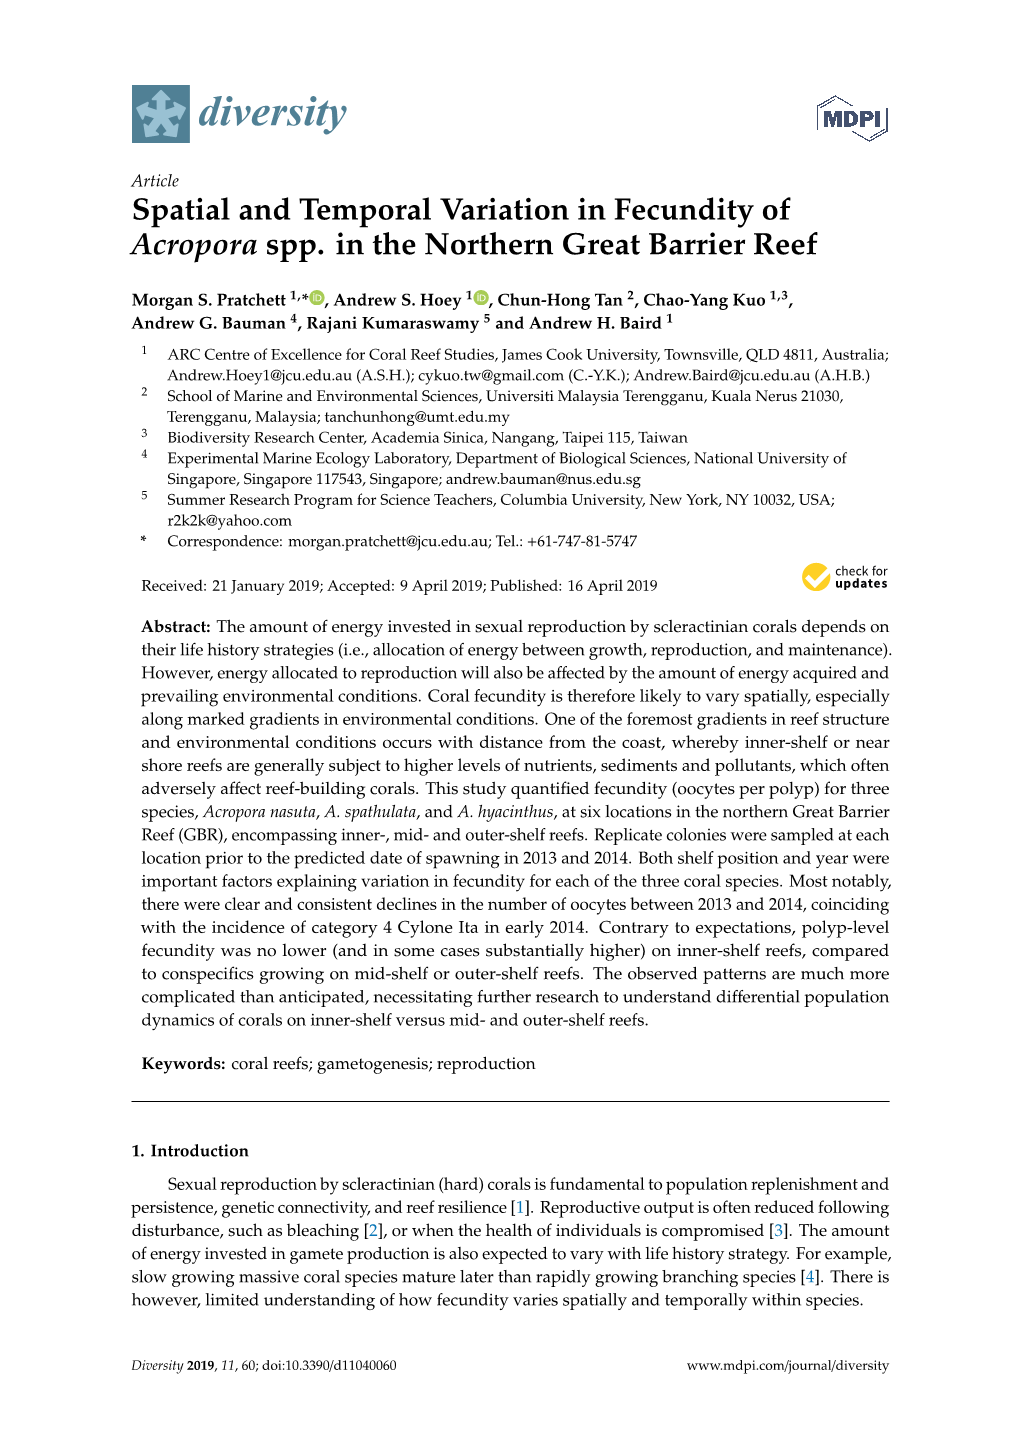 Spatial and Temporal Variation in Fecundity of Acropora Spp. in the Northern Great Barrier Reef